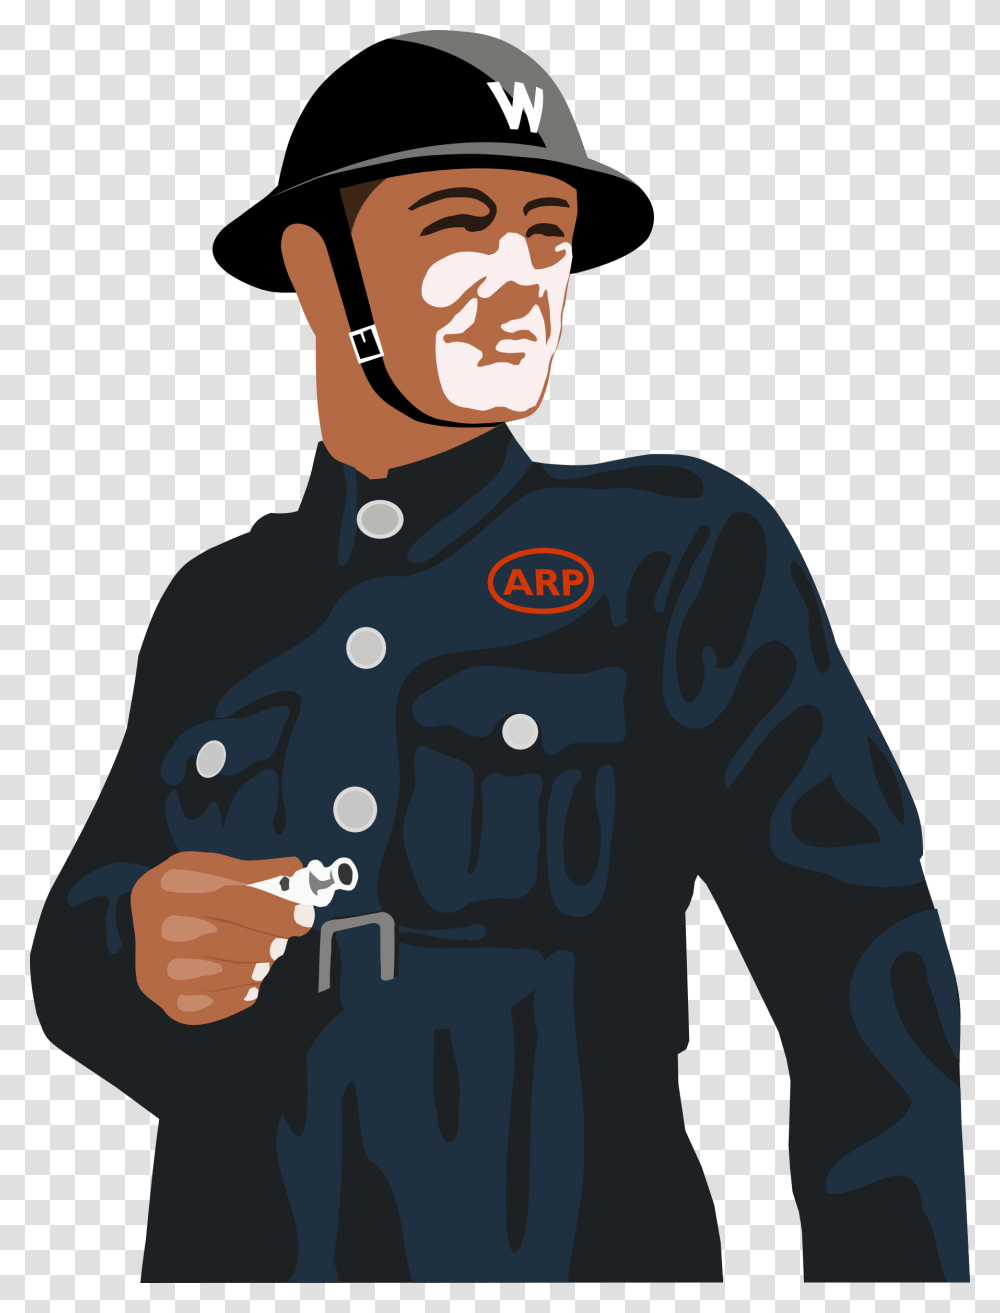 This Free Icons Design Of Ww2 Air Raid Warden Second World War, Military Uniform, Person, Human, Officer Transparent Png